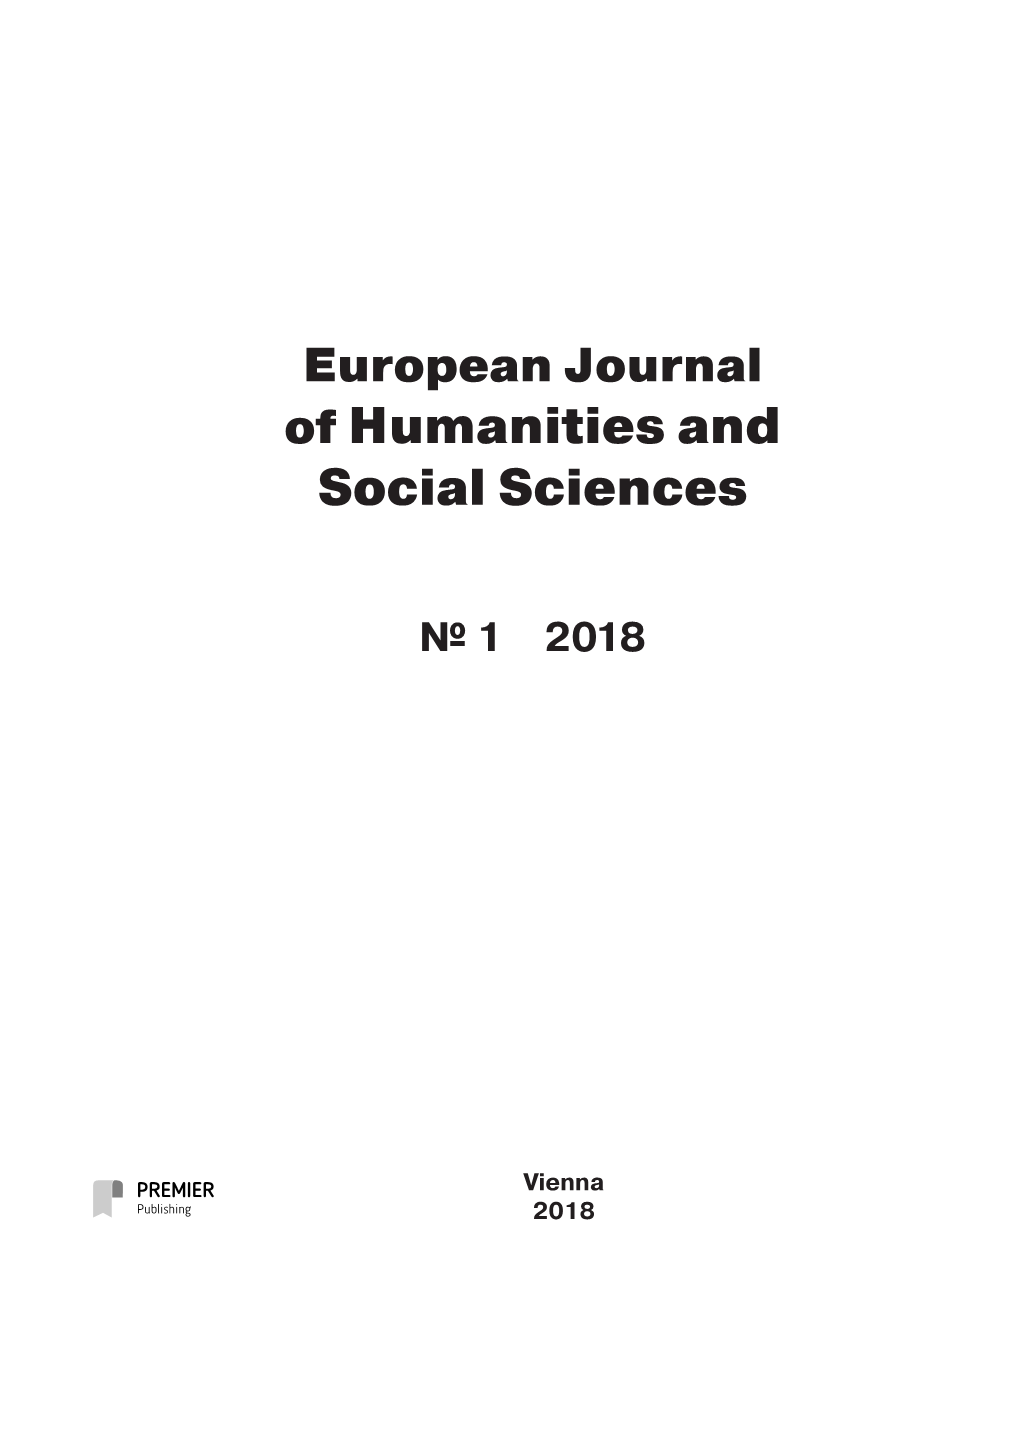 Of Humanities and Social Sciences